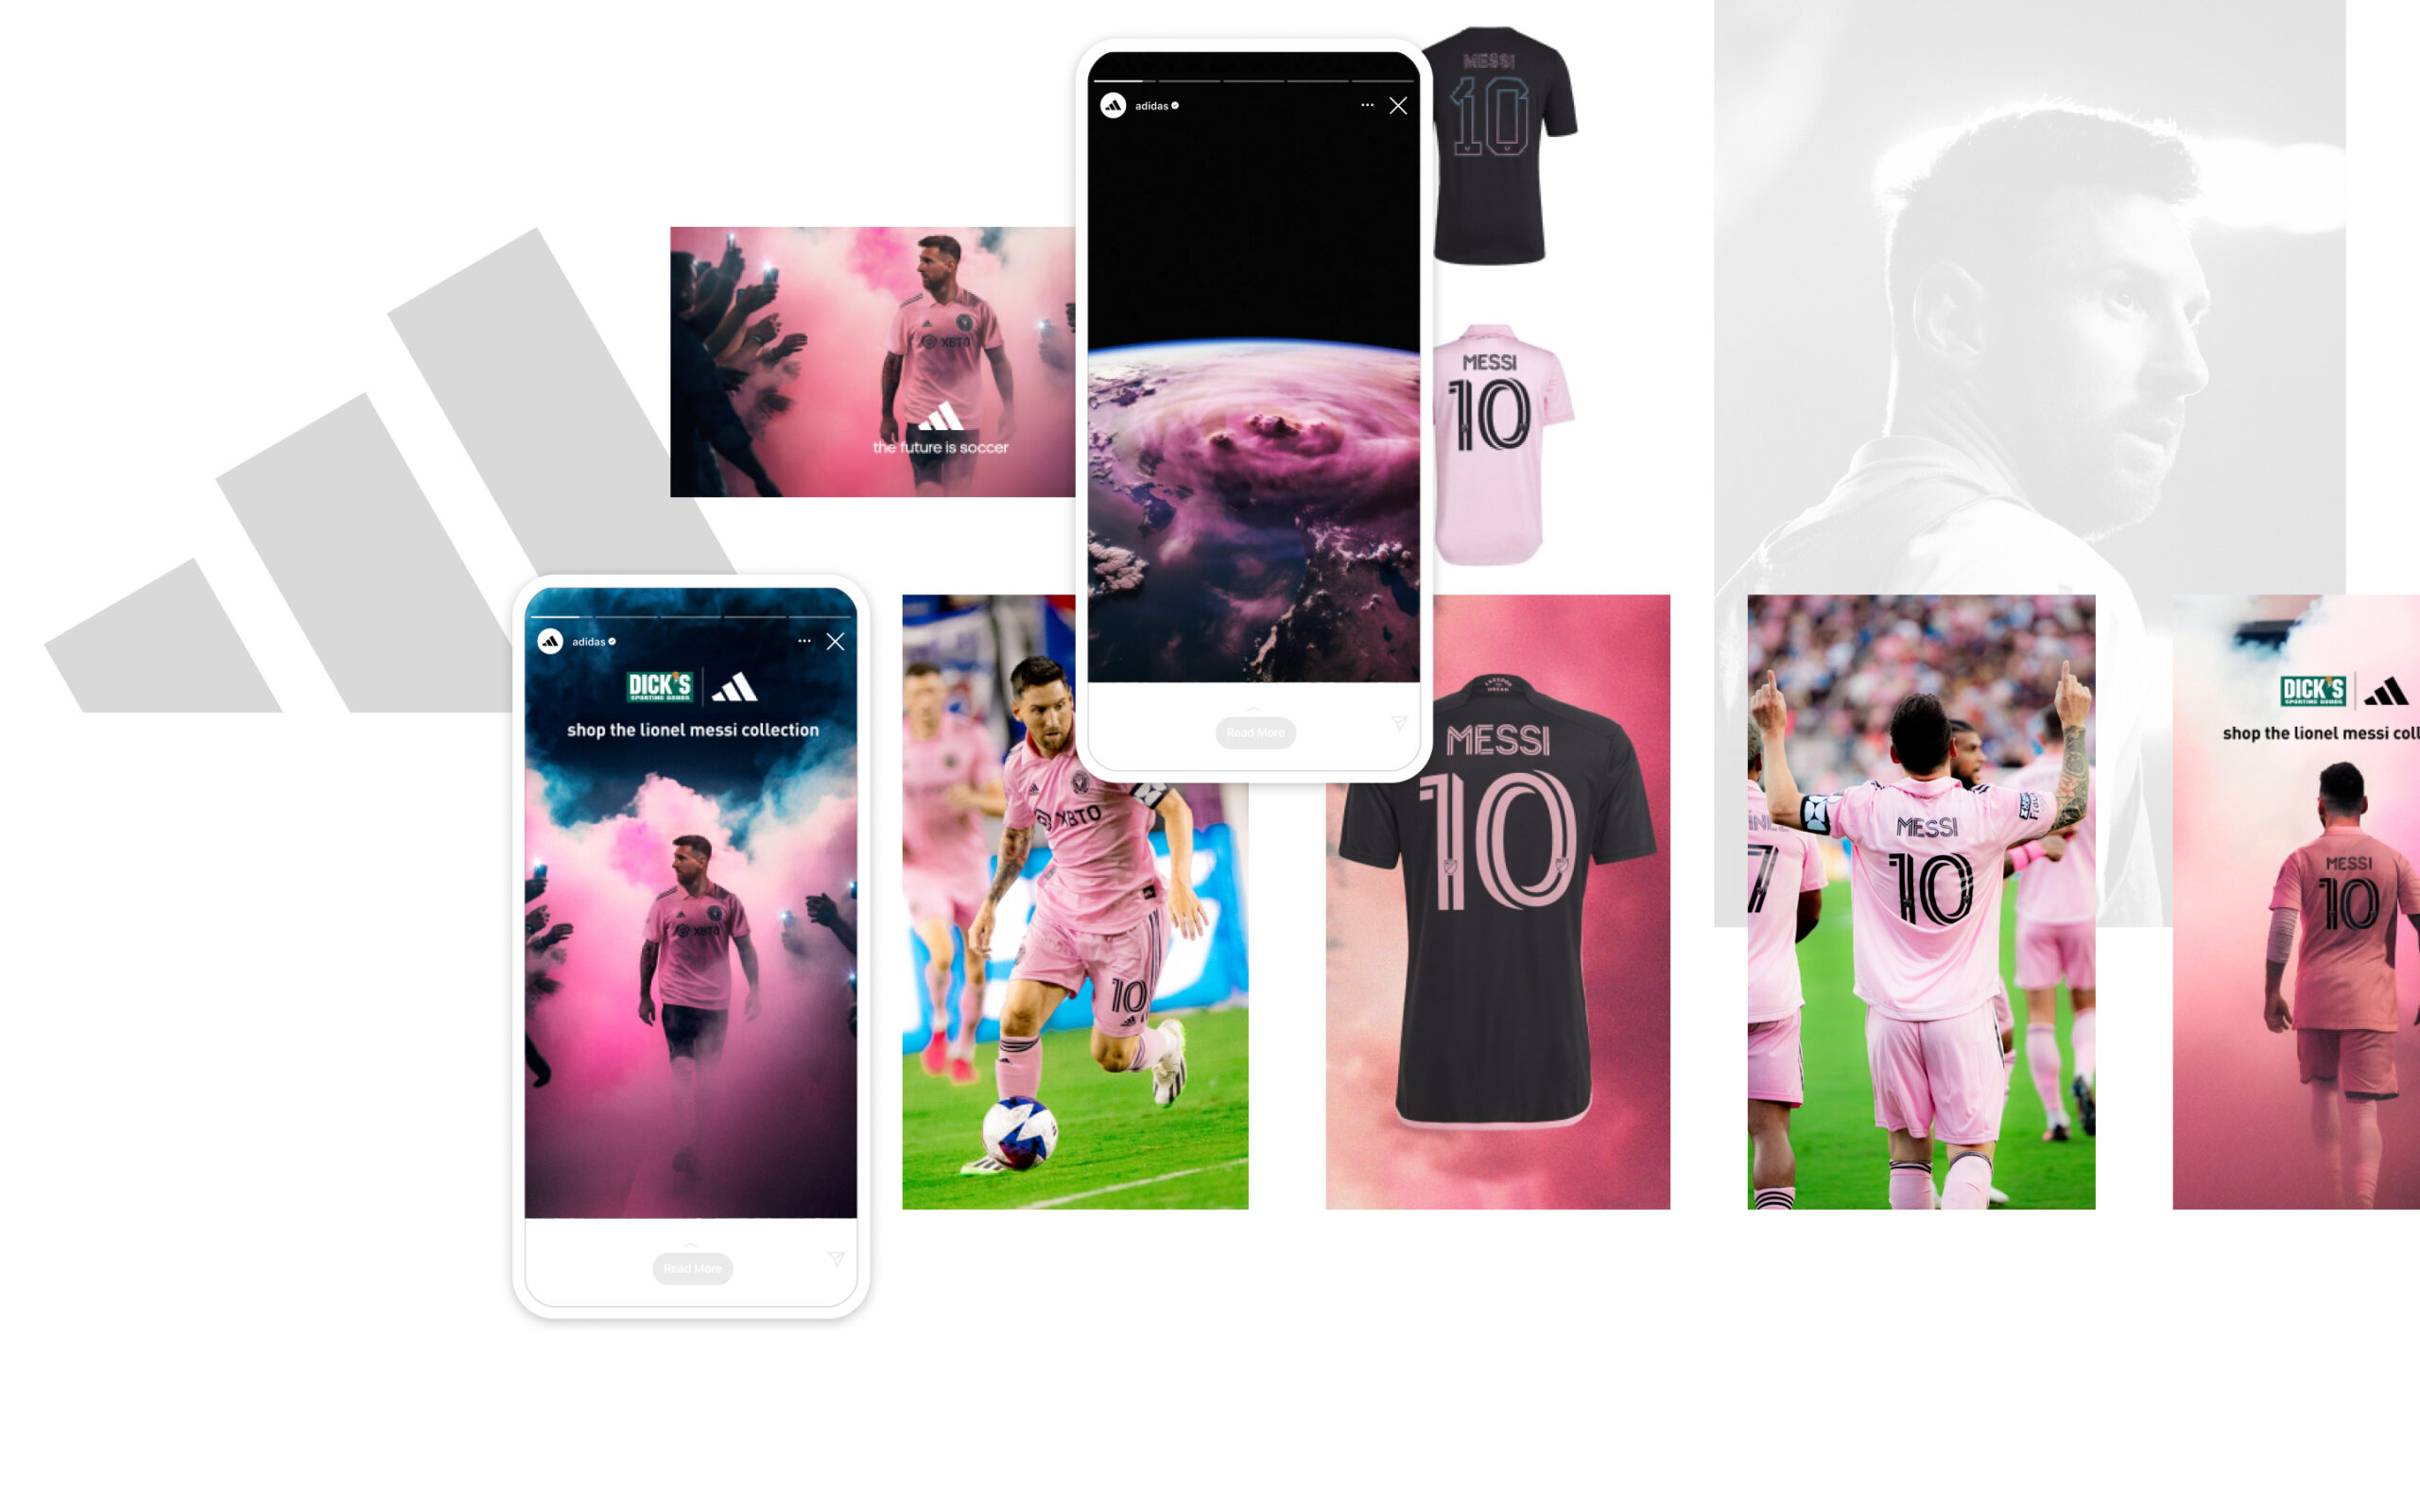 toolkit for adidas' Messi campaign